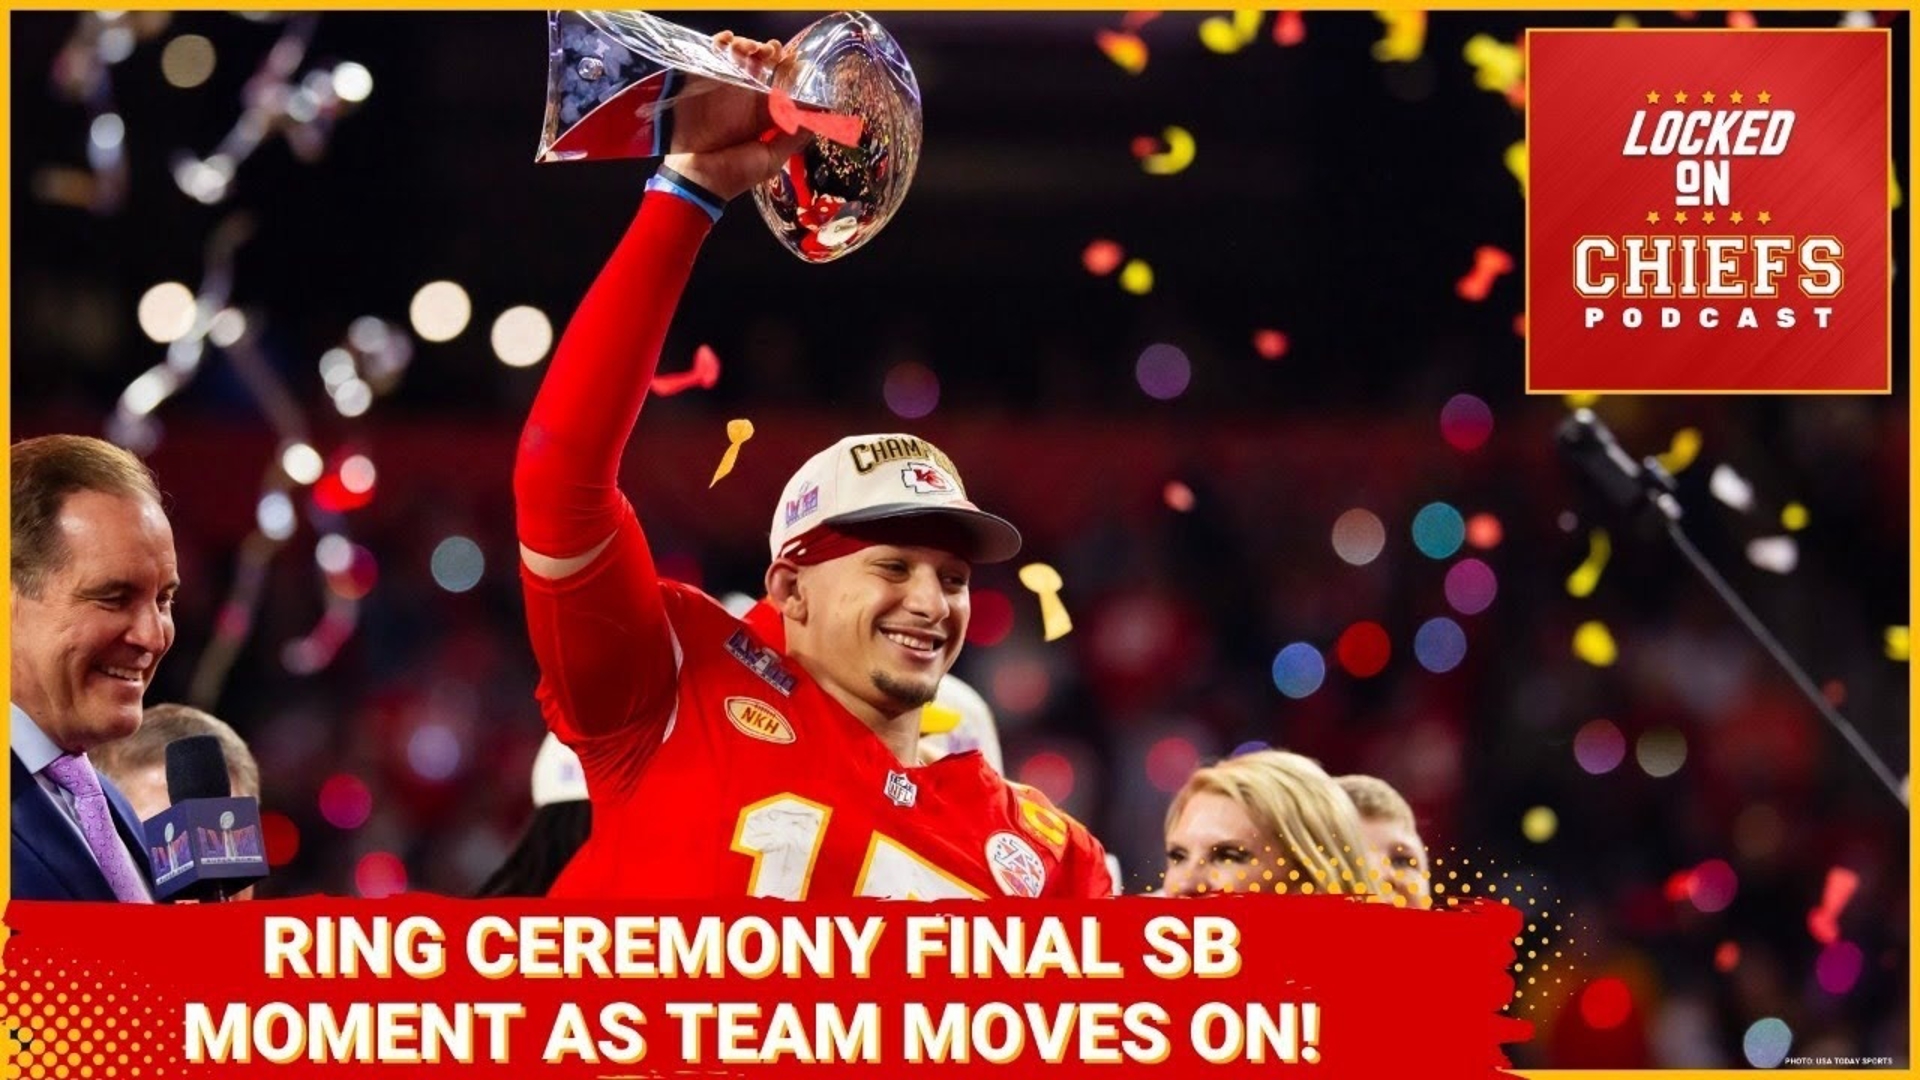 The Kansas City Chiefs received their Super Bowl rings on Thursday night. While it brought back familiar faces it is now time to move forward to the 2024 season.